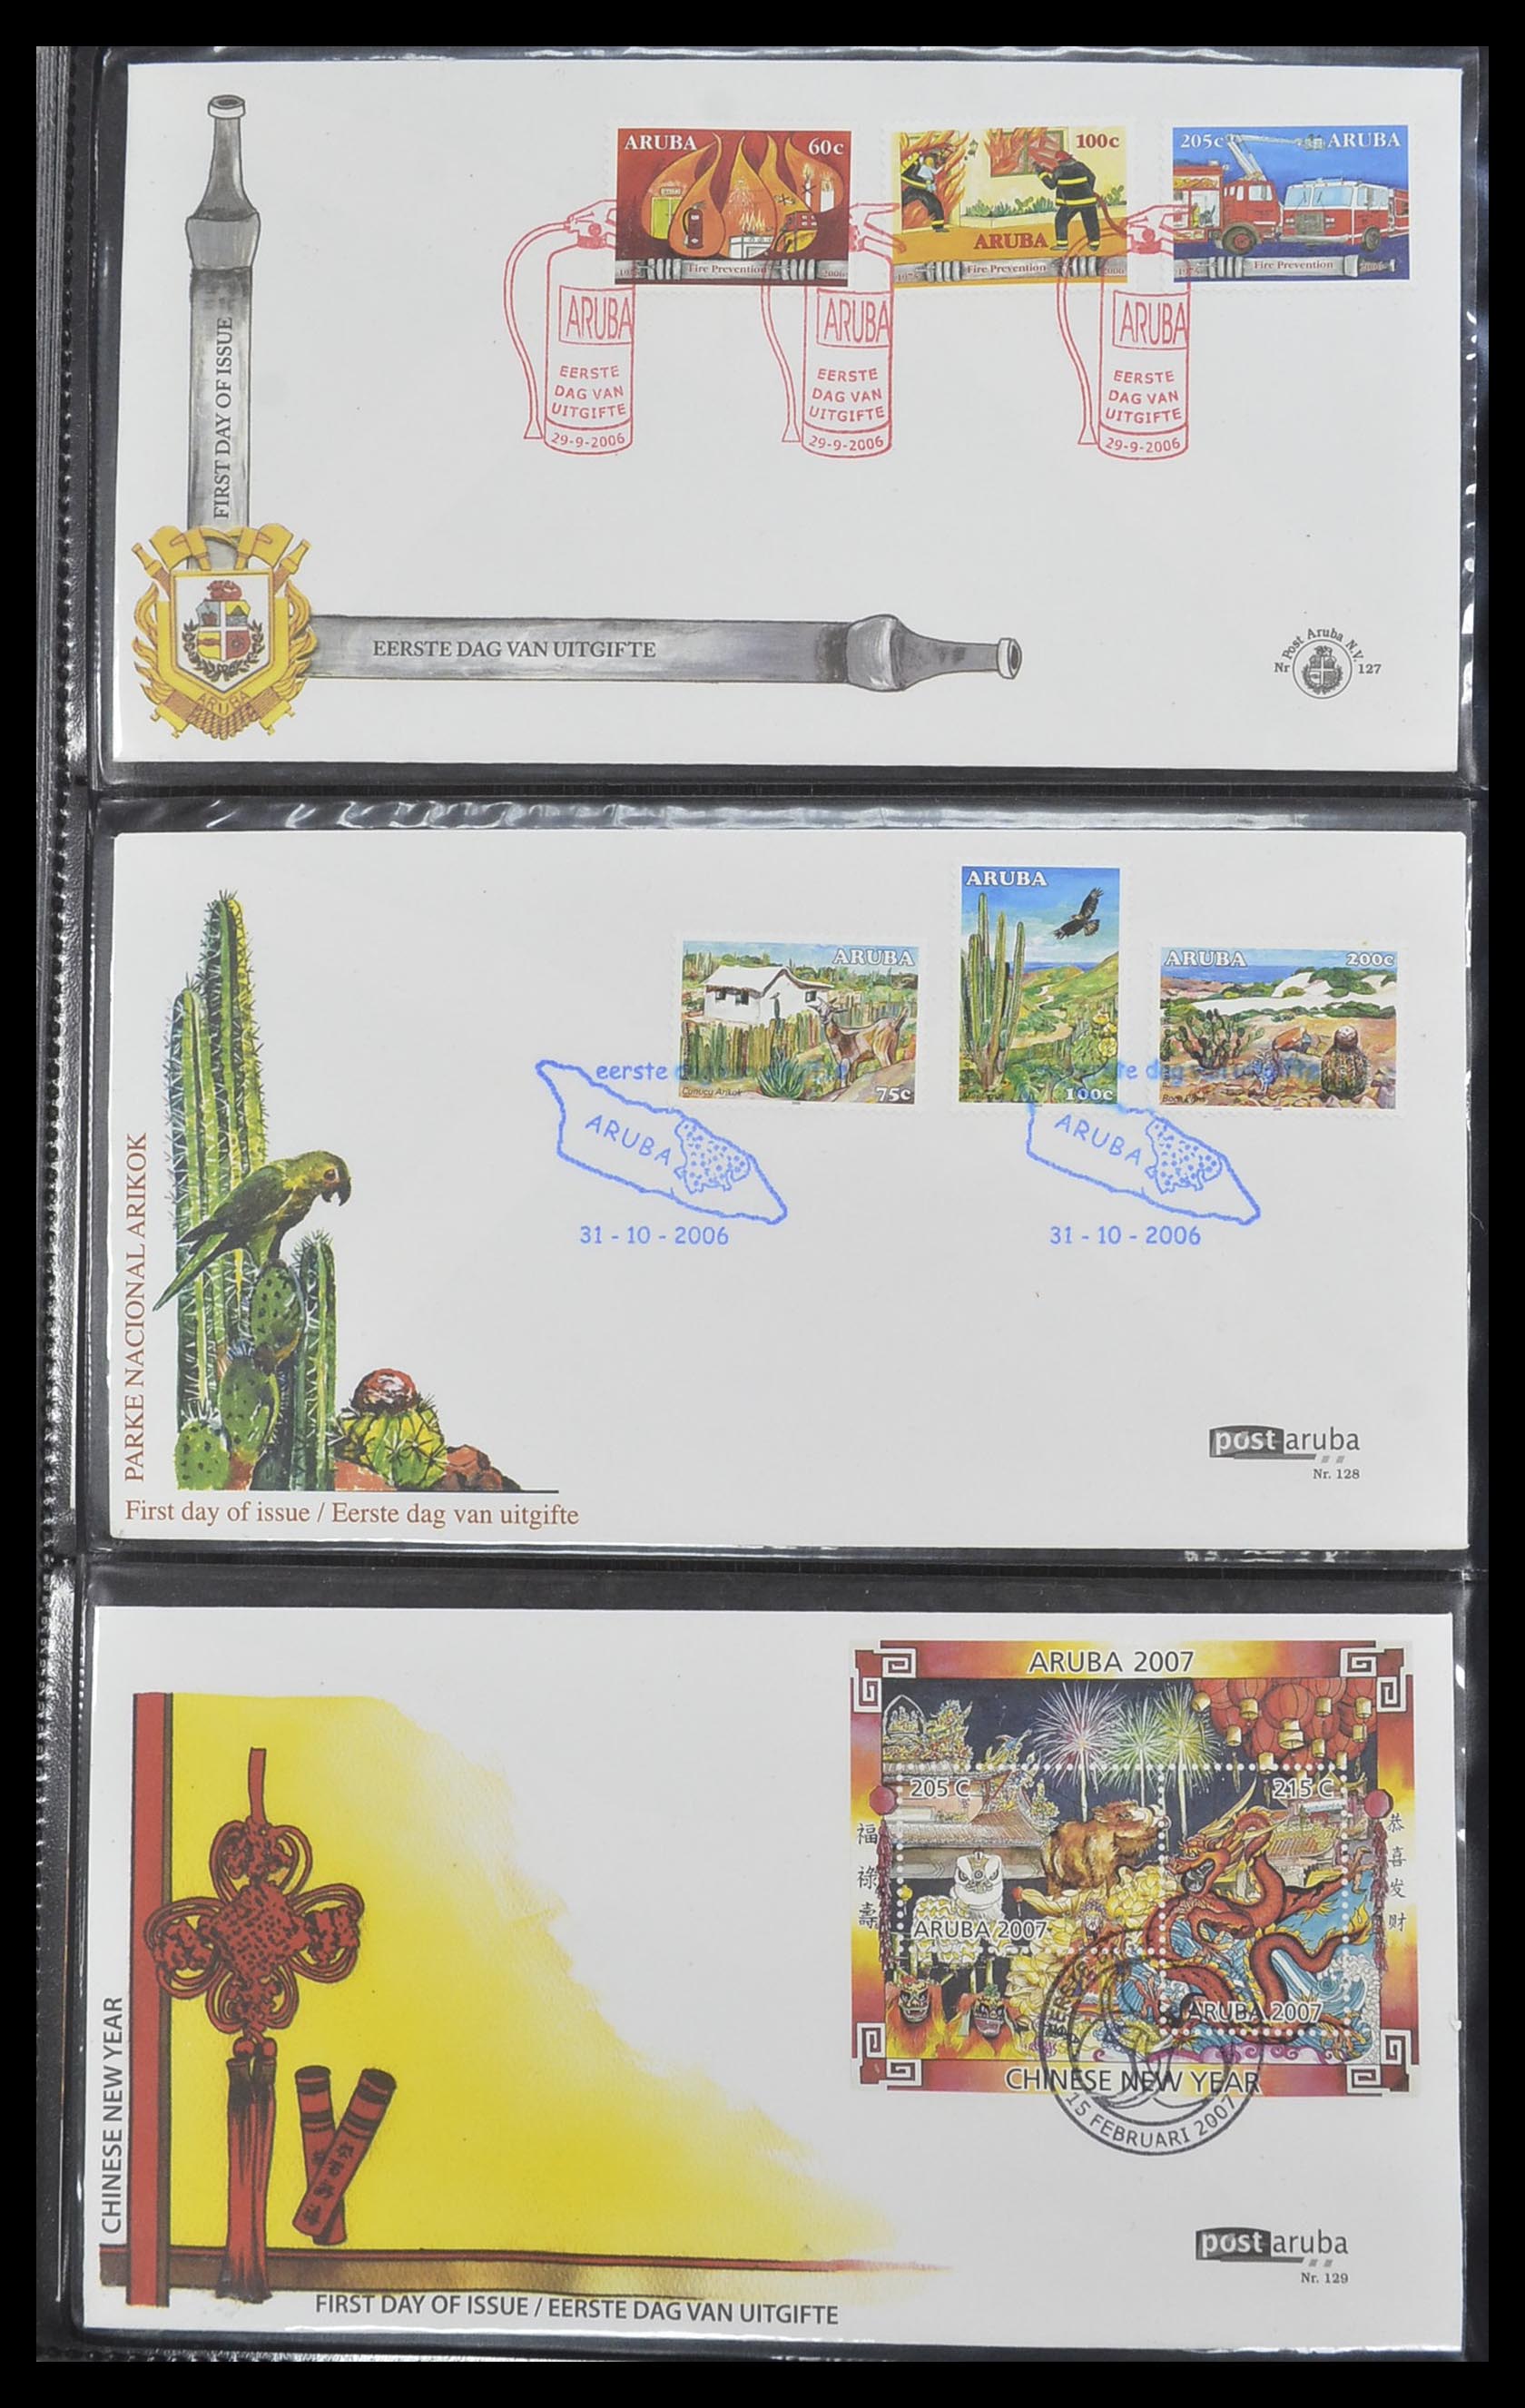 33585 044 - Stamp collection 33585 Aruba FDC's 1986-2006.